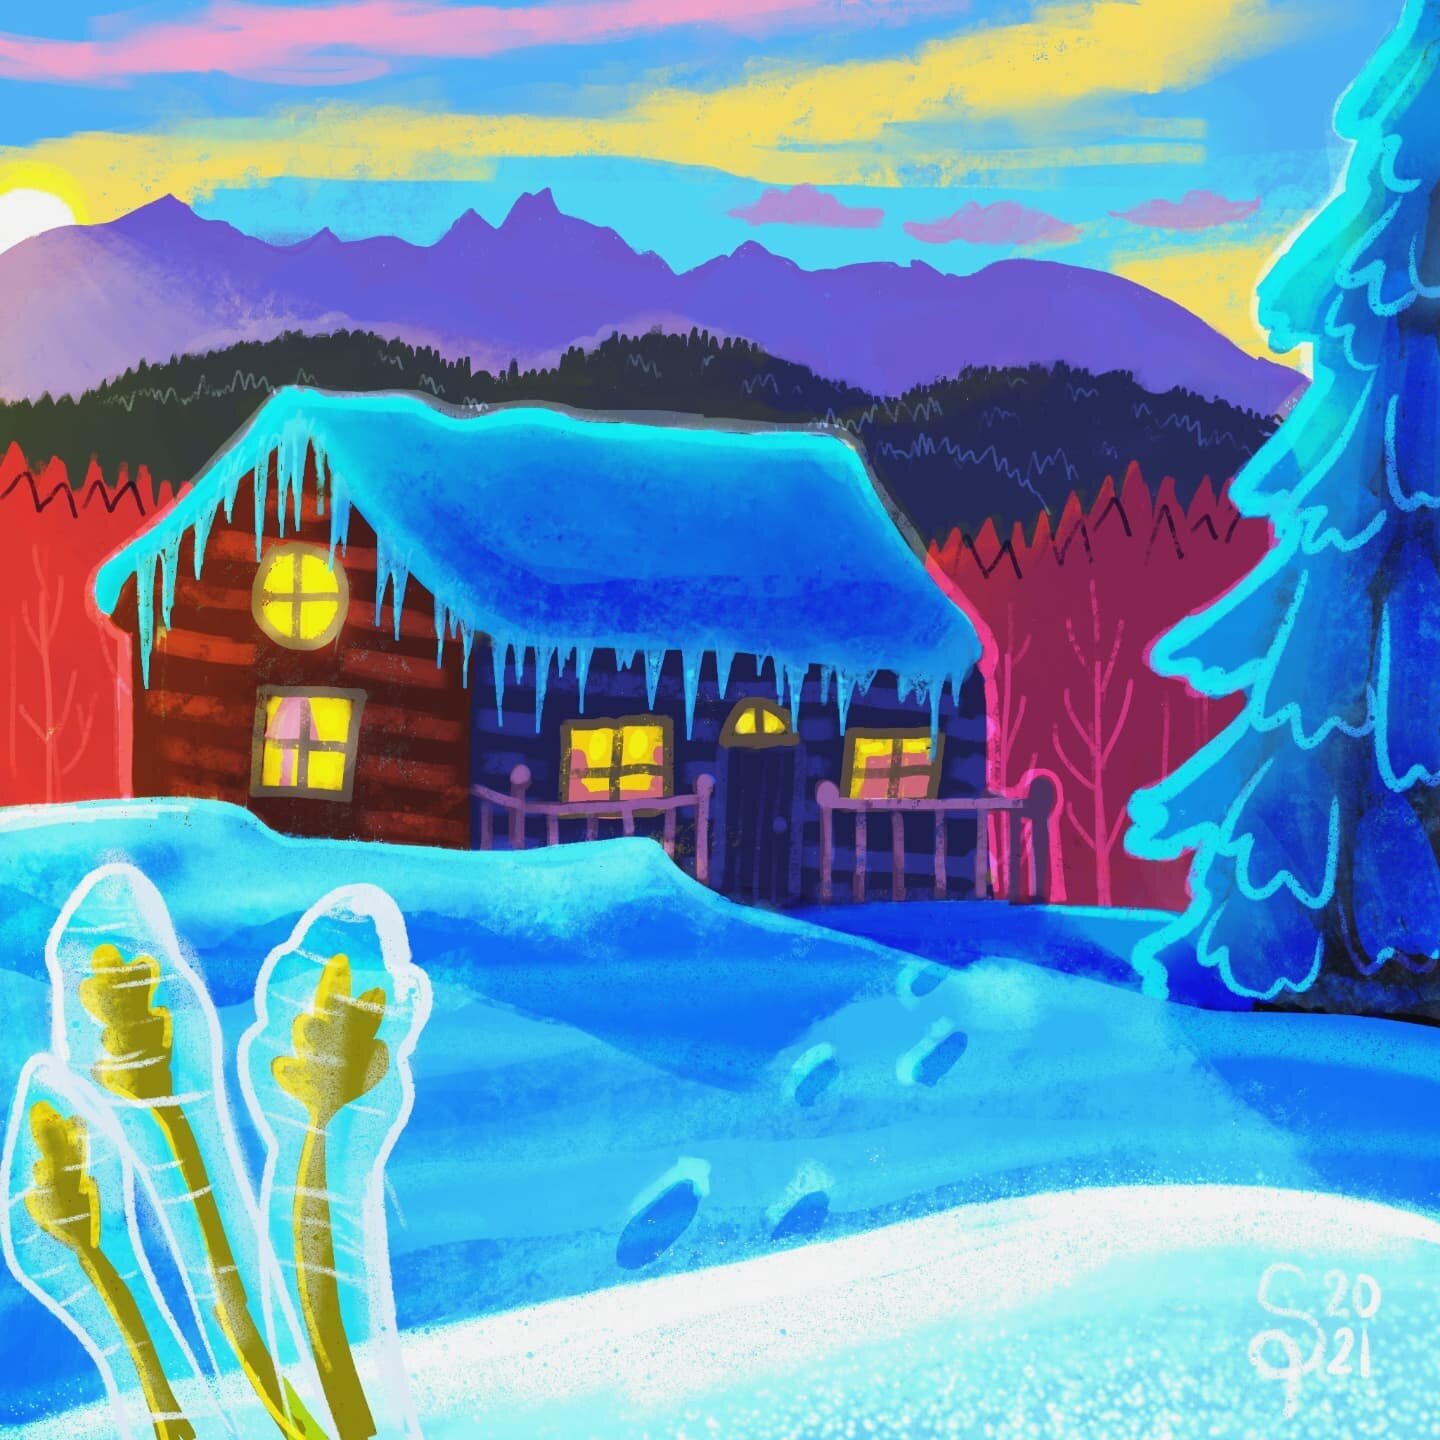 Decided to combine Day 4 and 5 of #Drawcember 
#icicle and #home 🏠❄️

#draw #drawing #art #artwork #instaart #illustration #landscape #colorful #create #drawingoftheday #artofinstagram #artoftheday #mountains #logcabin #speedpainting #speeddrawing #